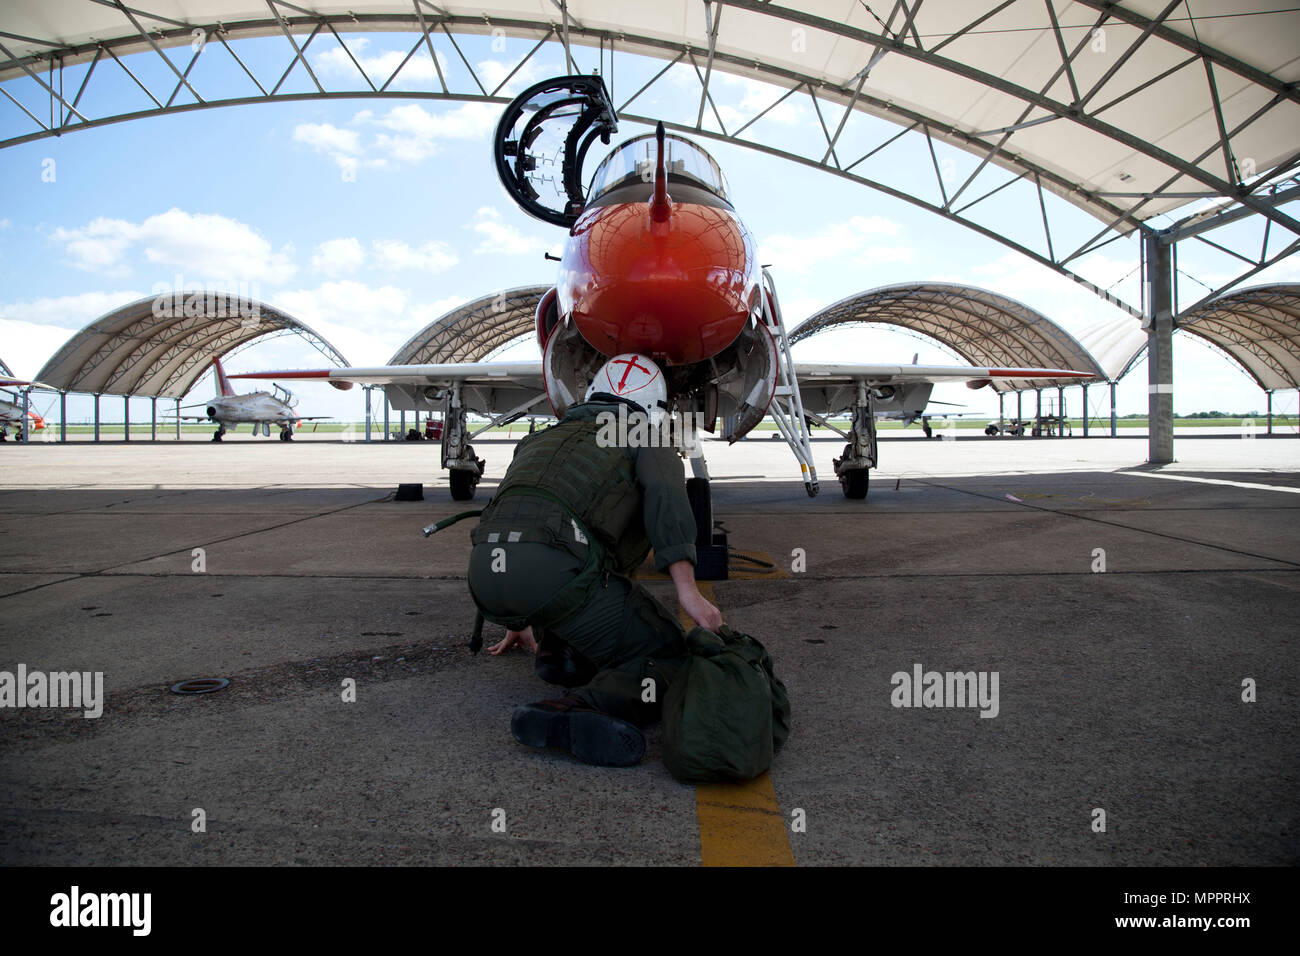 U.S. Marine Corps Lt. Col. Jeremy W. Siegel, executive officer of Training Air Wing Two, conducts a preflight check on a T-45C training aircraft at Naval Air Station Kingsville, Texas, March 21, 2017. The mission of Training Air Wing Two is to provide undergraduate level pilot training for Marines to prepare them for the Fleet Marine Force. (U.S. Marine Corps photo by Lance Cpl. Jose Villalobosrocha) Stock Photo